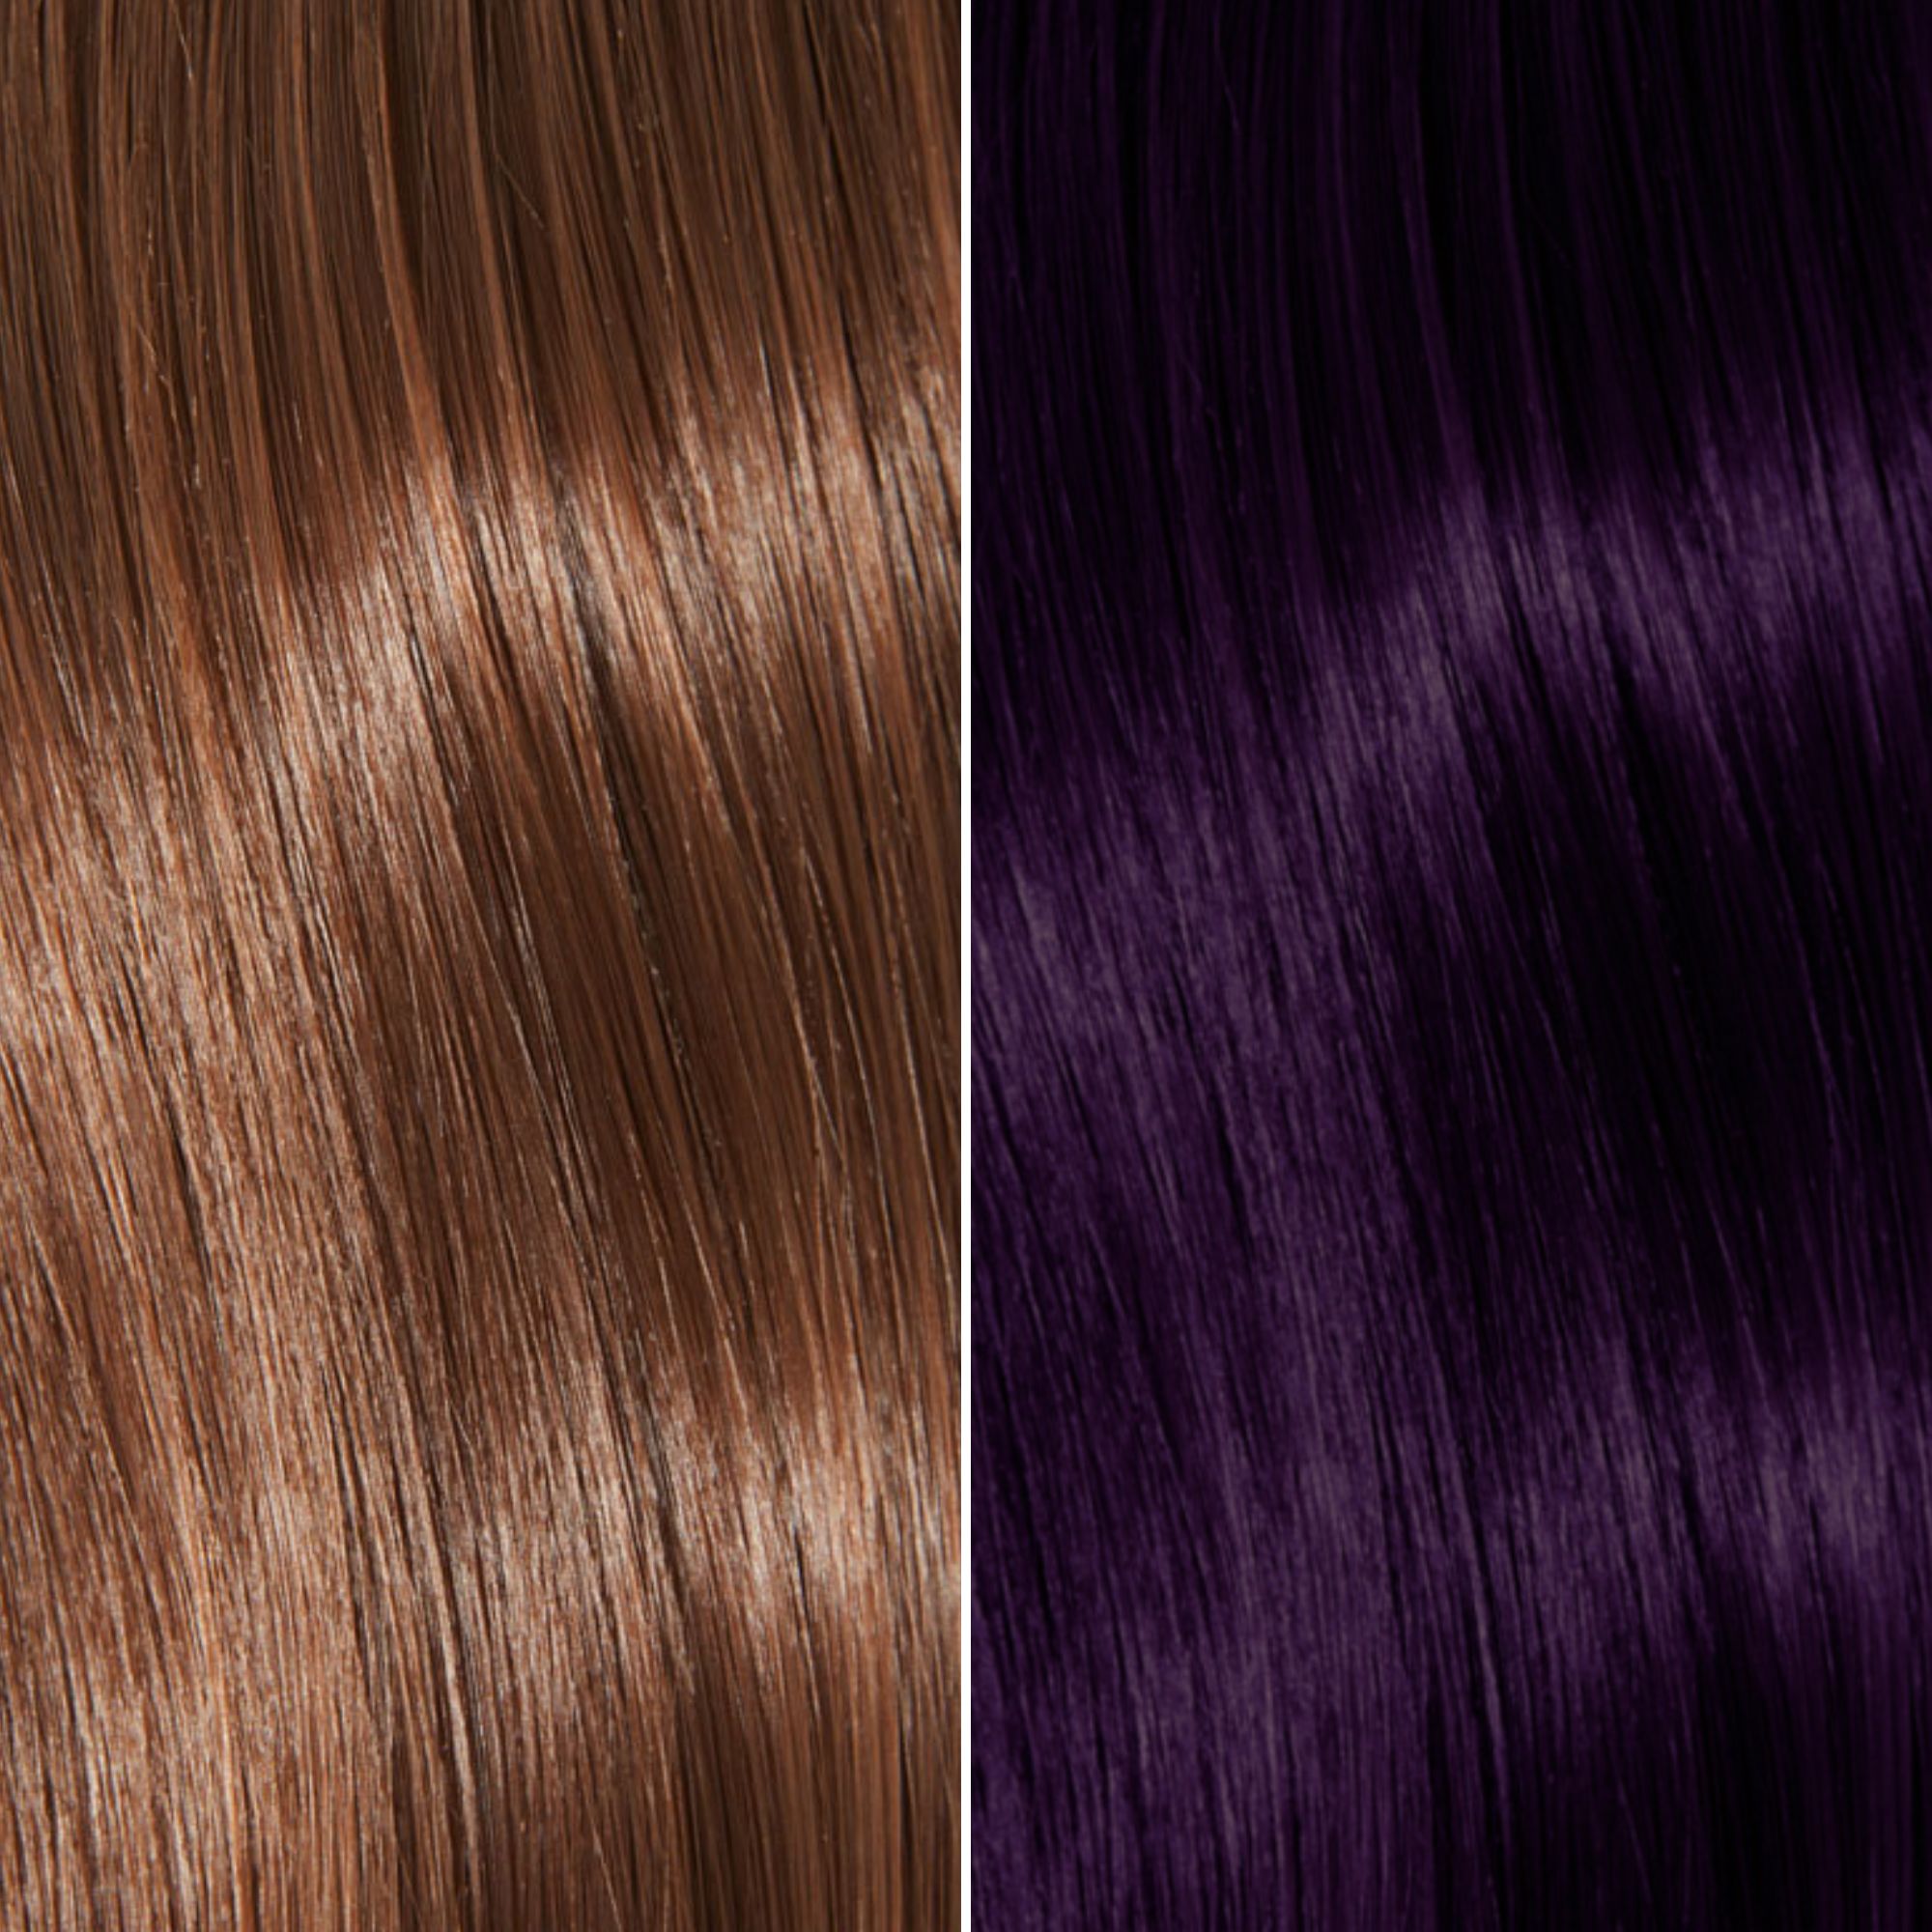 Do I need to remove a dark brown prior to dyeing or can I dye right over  the brown & achieve an eggplant type purple?